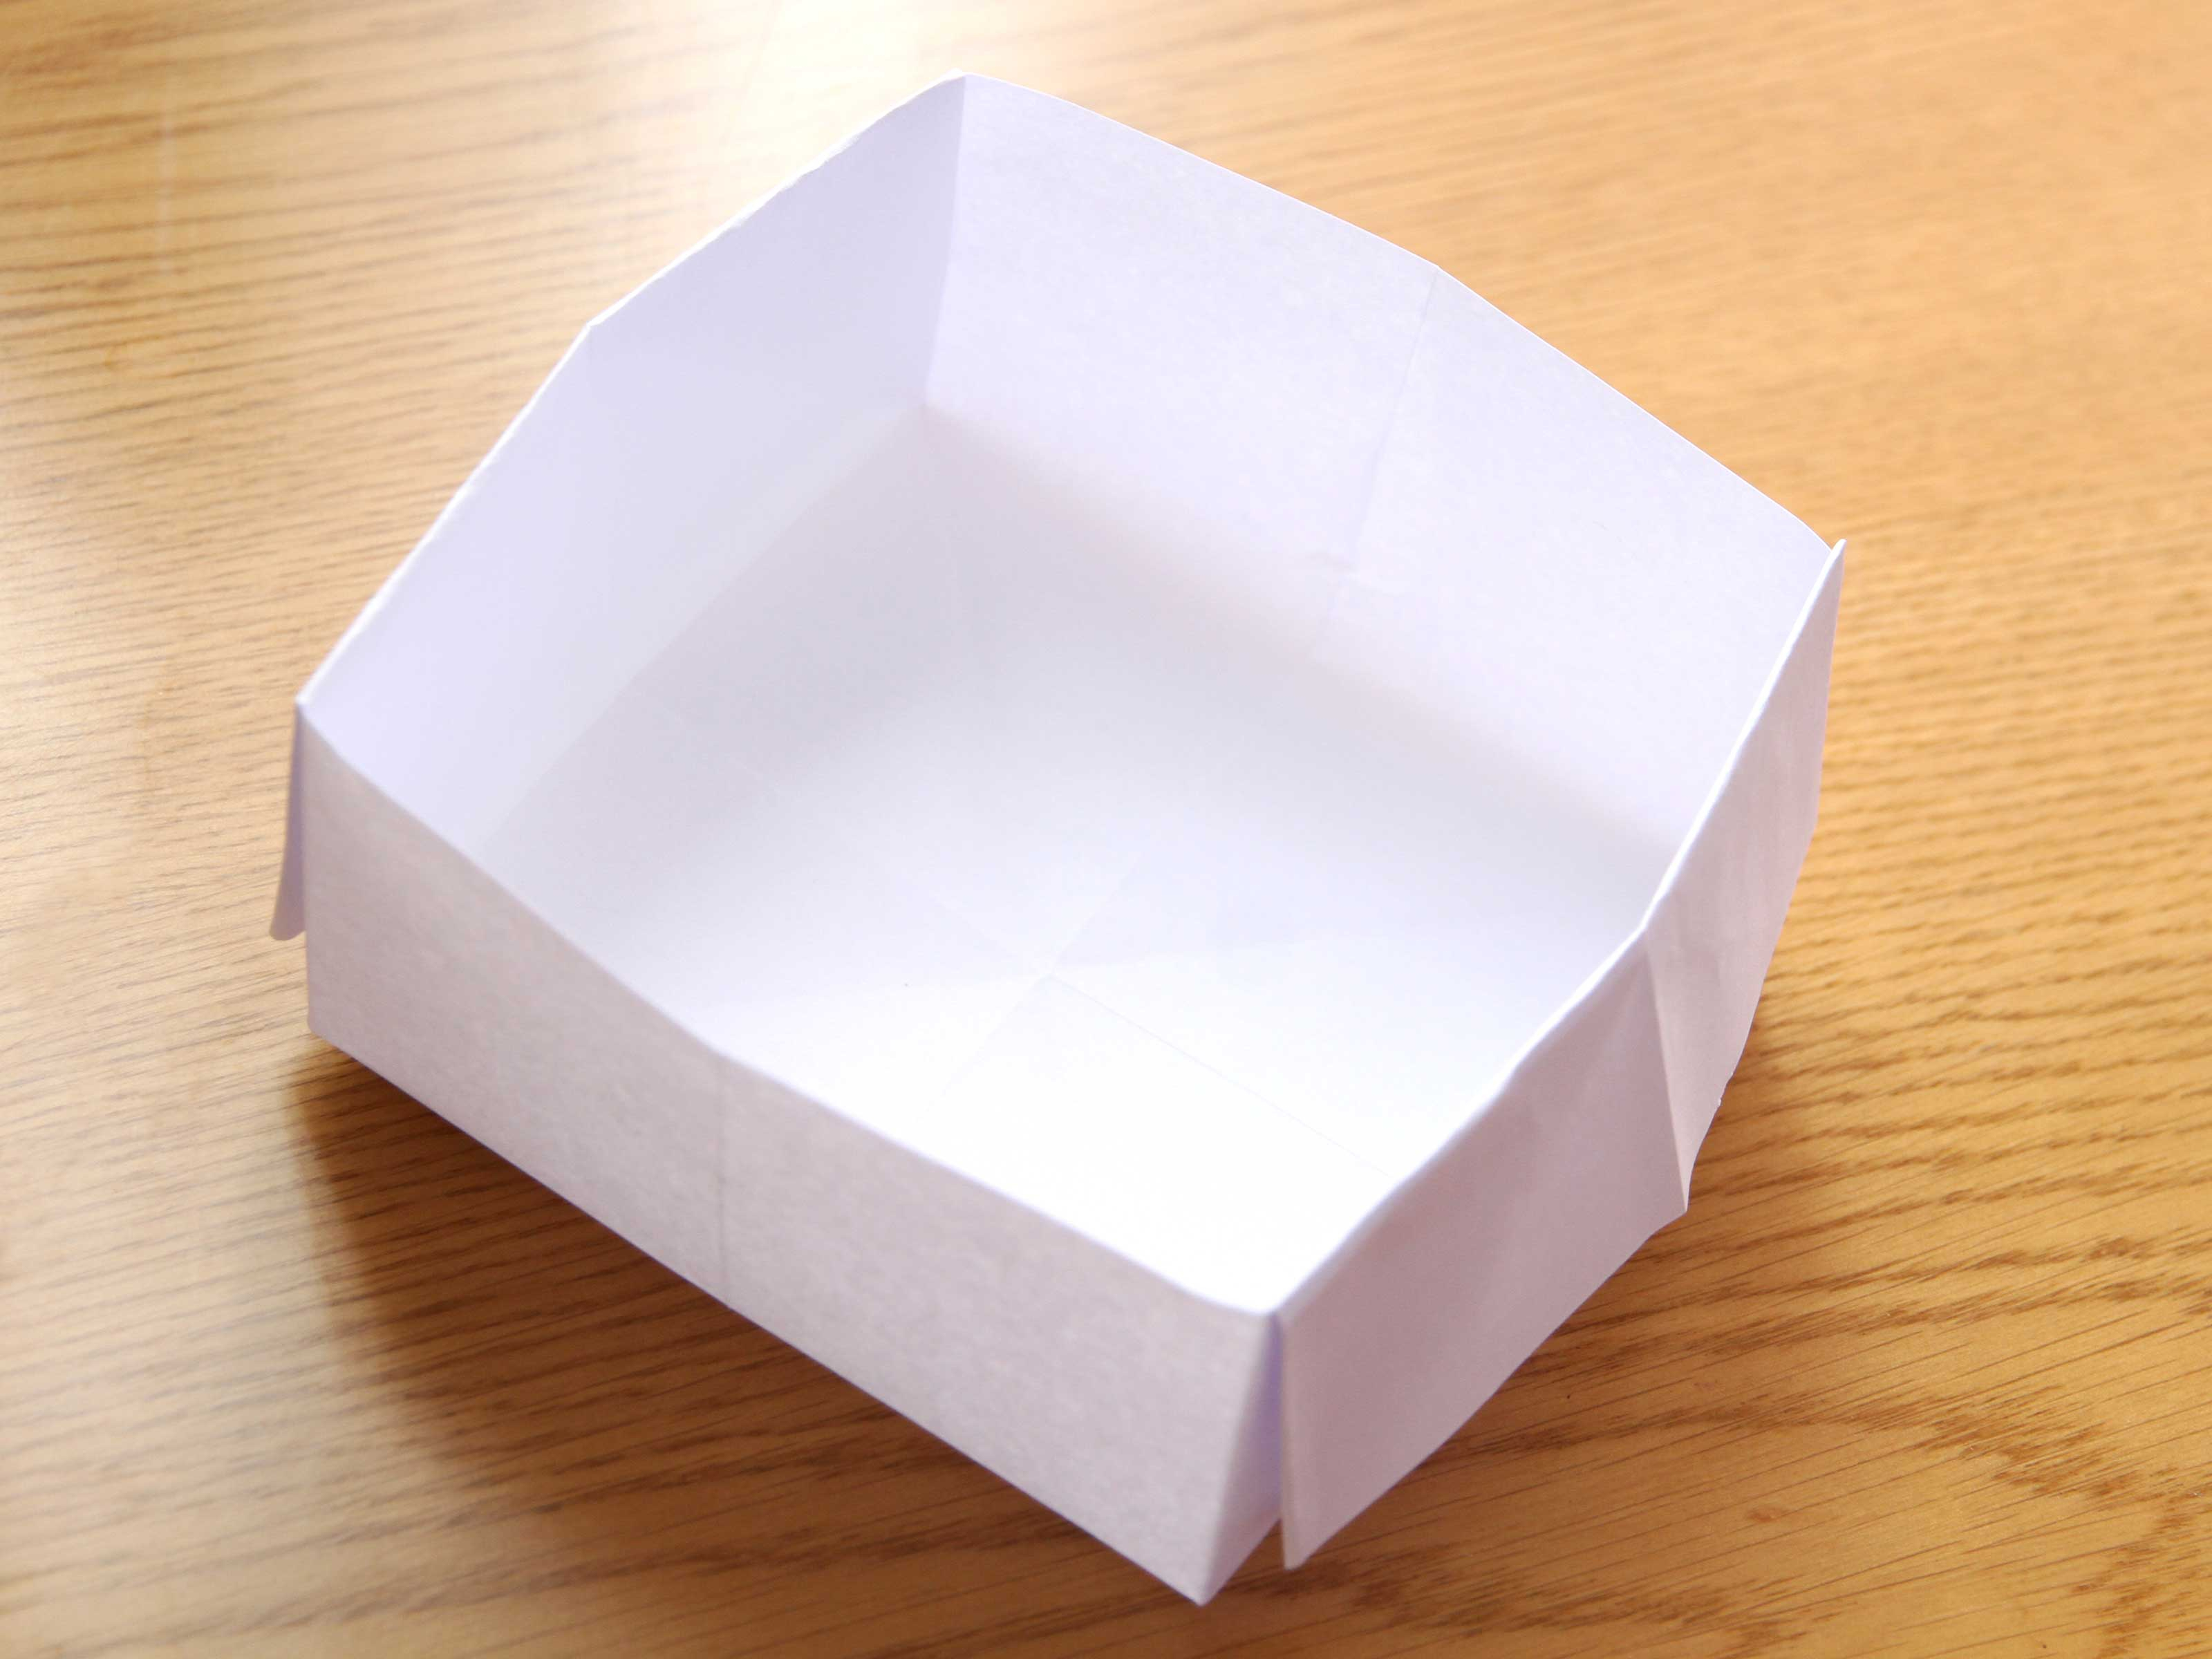 Origami Photo Box How To Make An Origami Box With Printer Paper 12 Steps